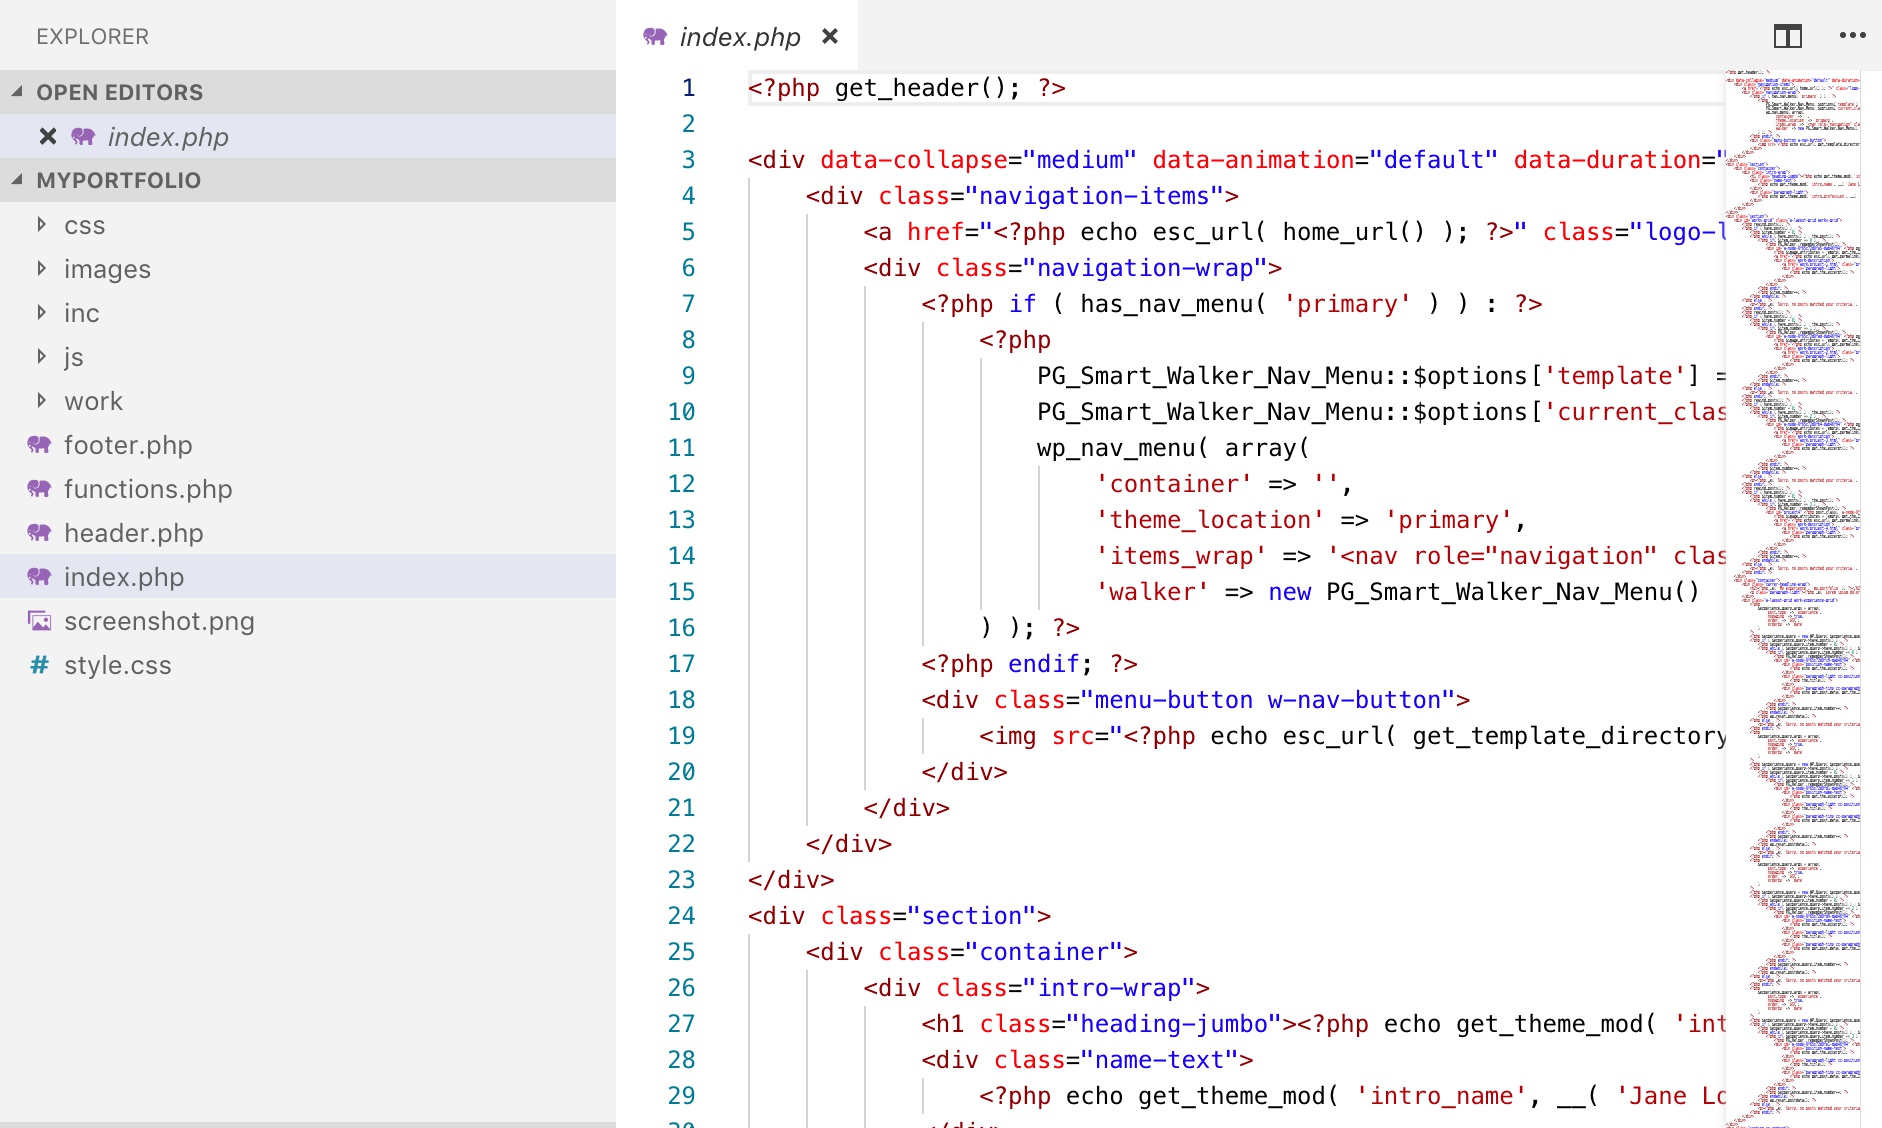 Generated PHP code for the WordPress theme.